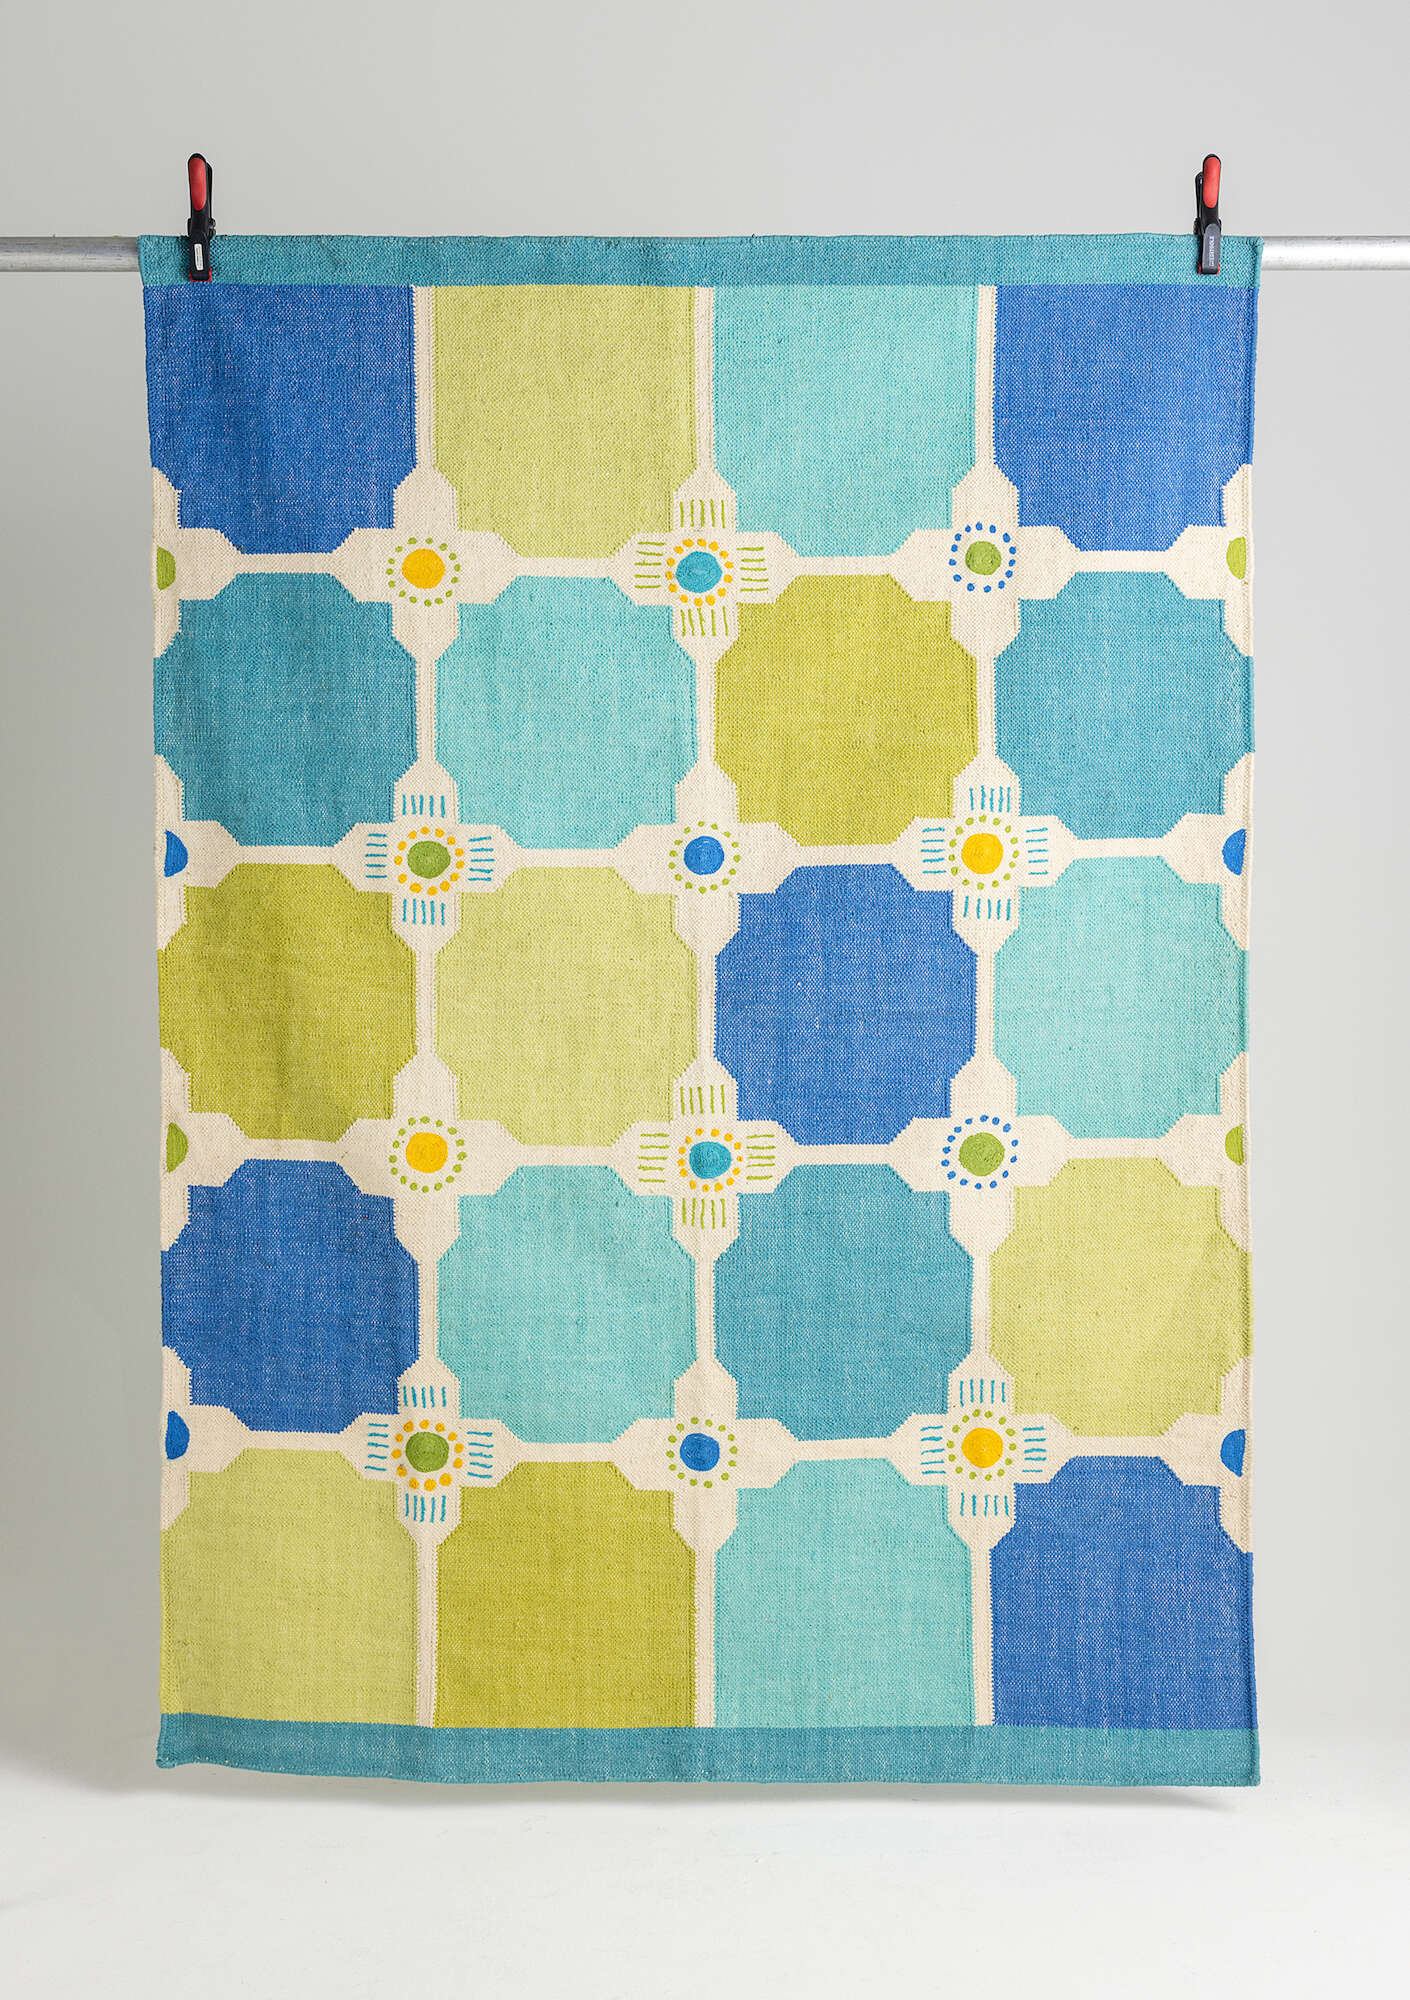  Jacquard-woven “Tiles” rug in organic cotton flax blue